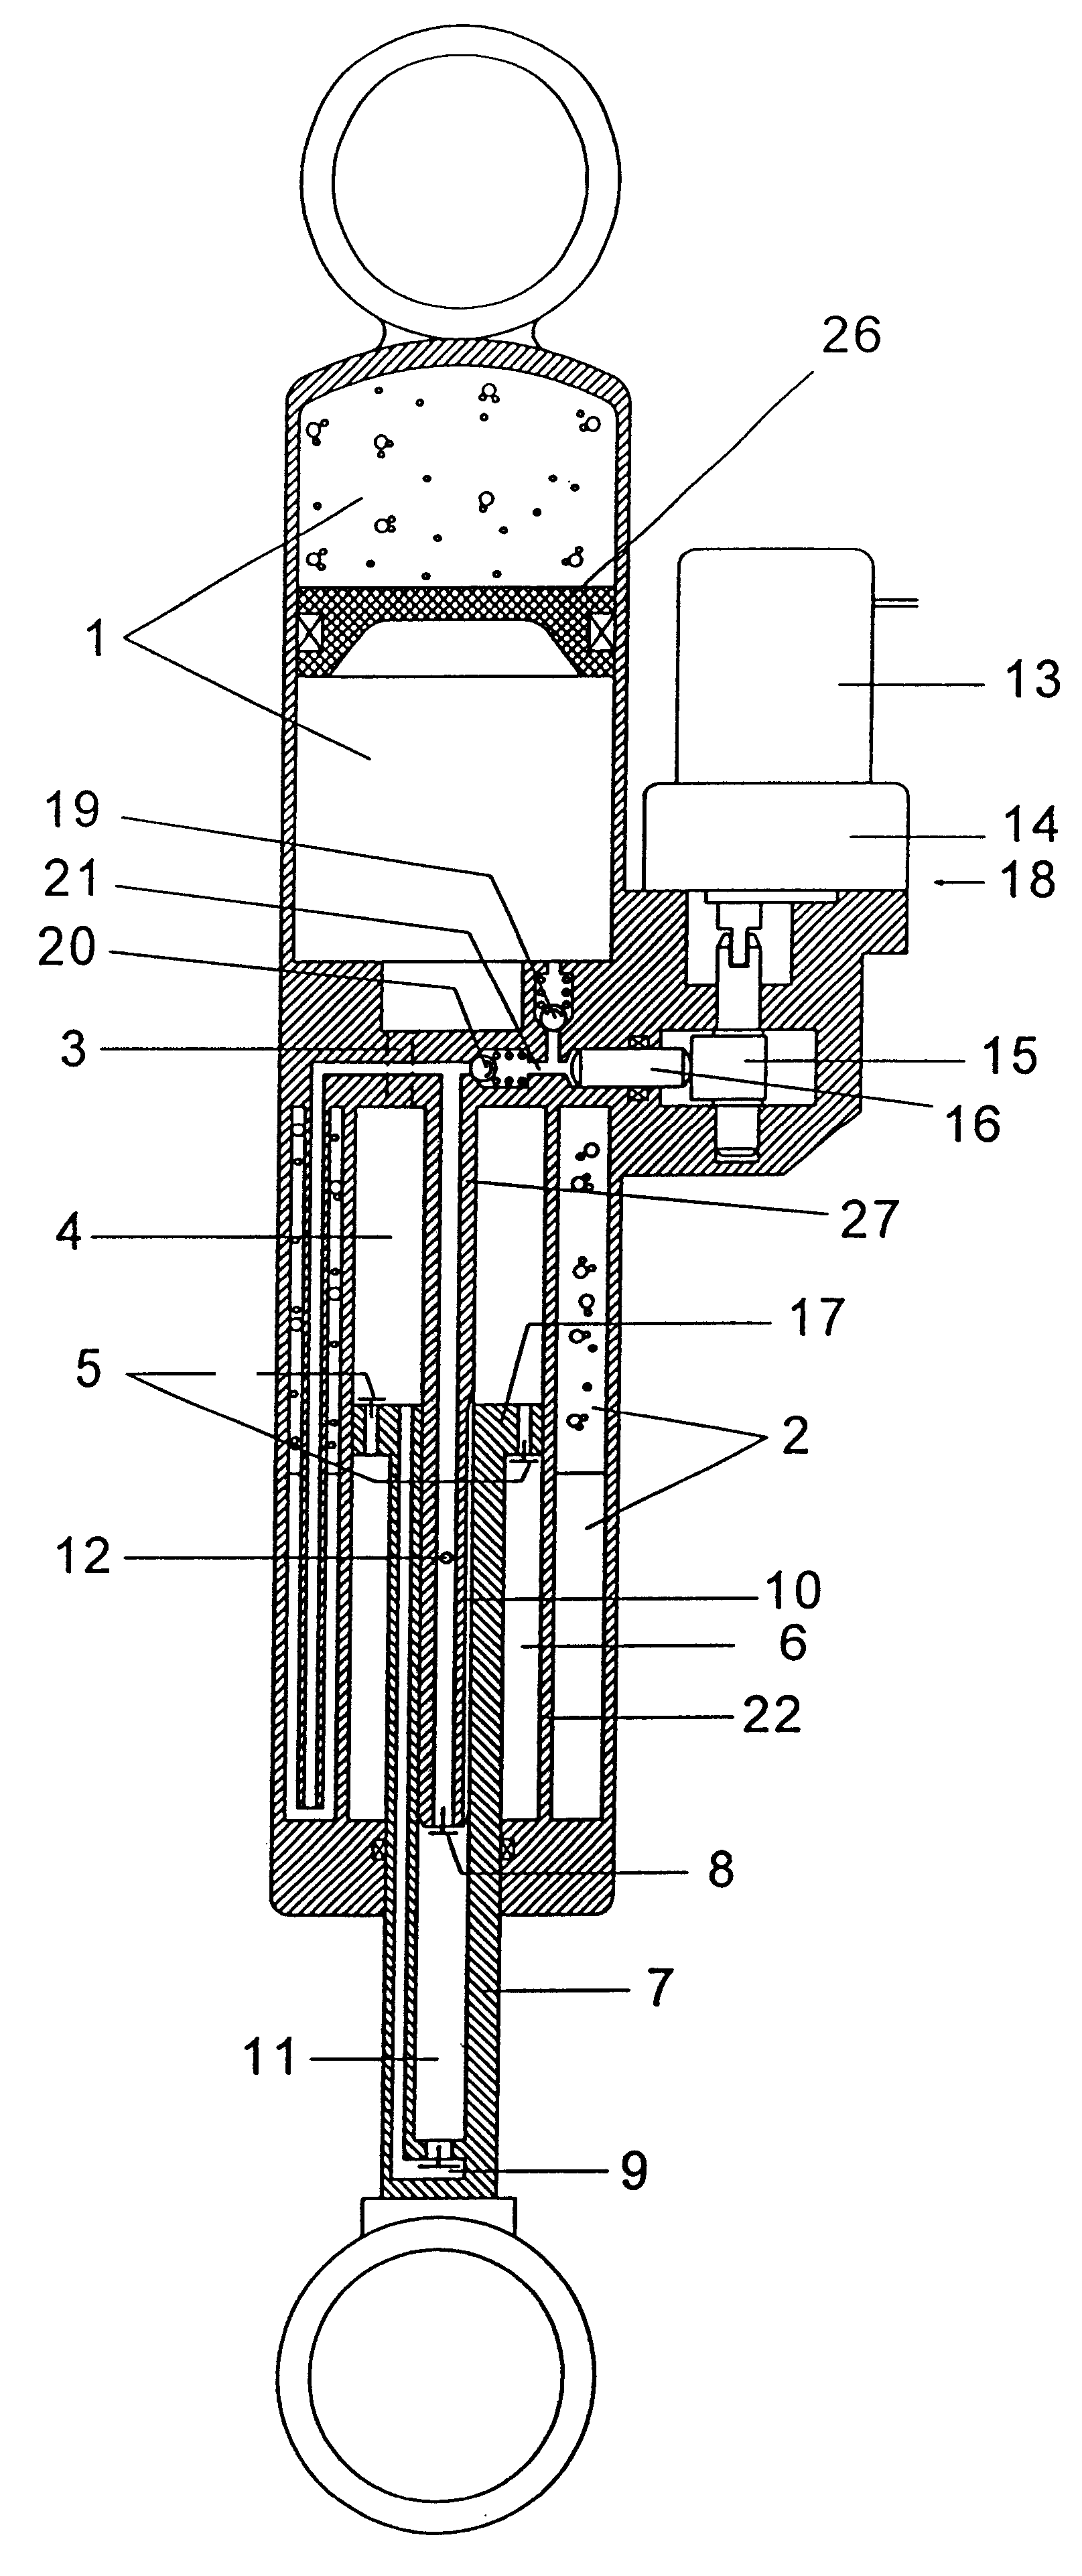 Self-pumping hydropneumatic spring strut with internal leveling